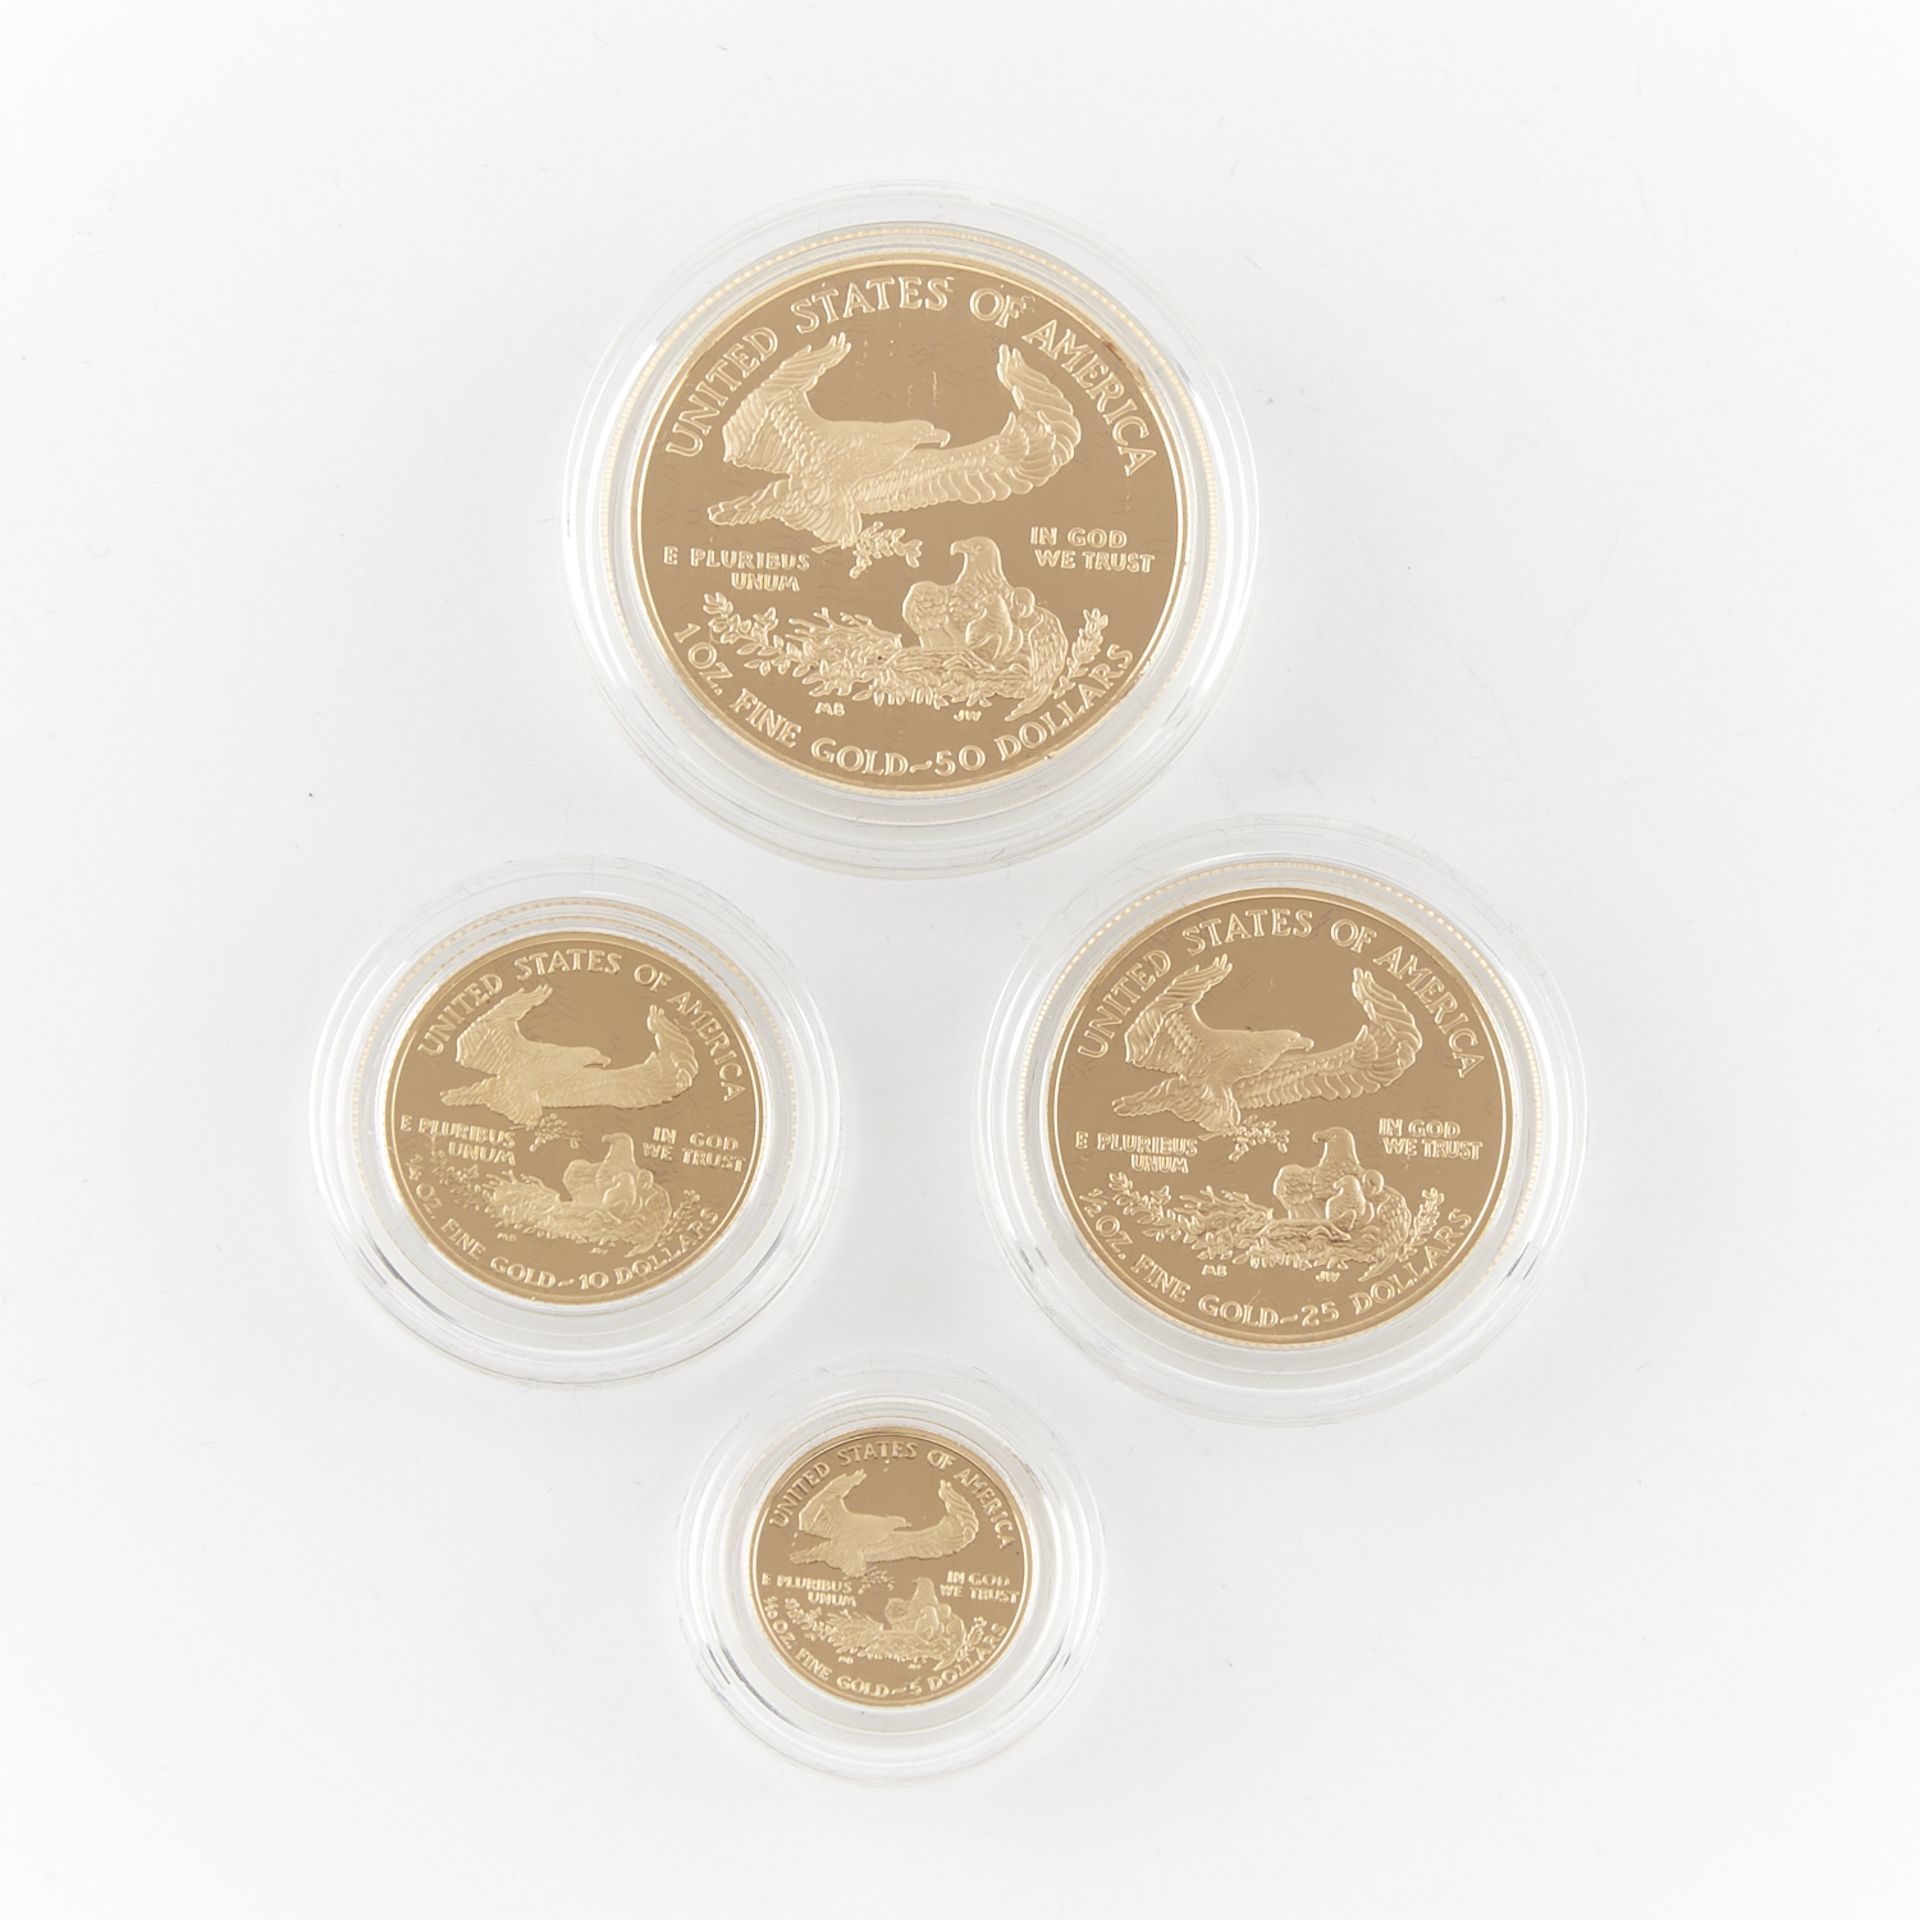 2005 Gold Proof American Eagle 4 Coin Set - Image 2 of 3